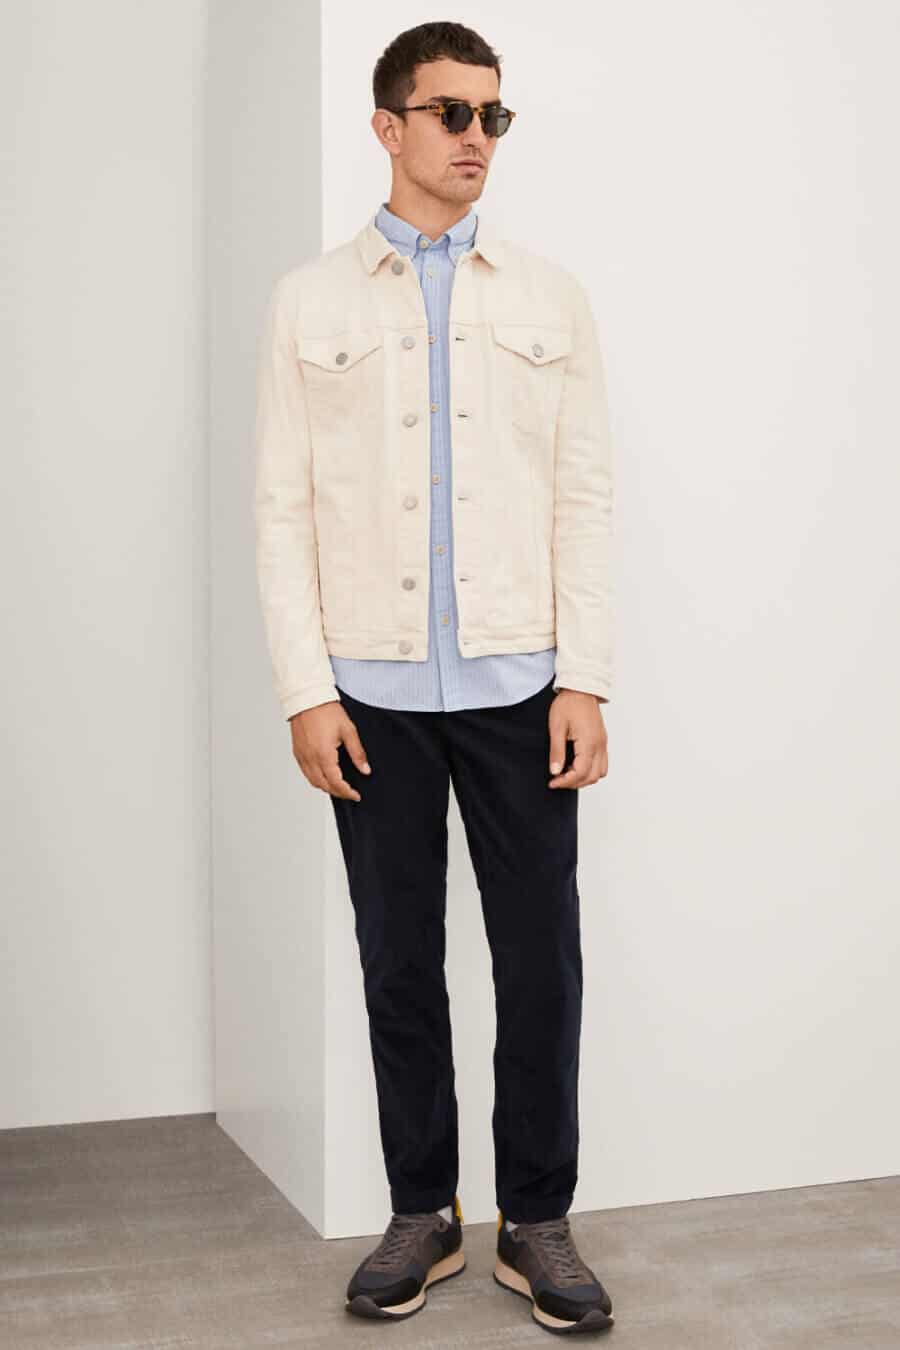 Smart casual spring jean jacket outfit for men layered over a shirt with chinos